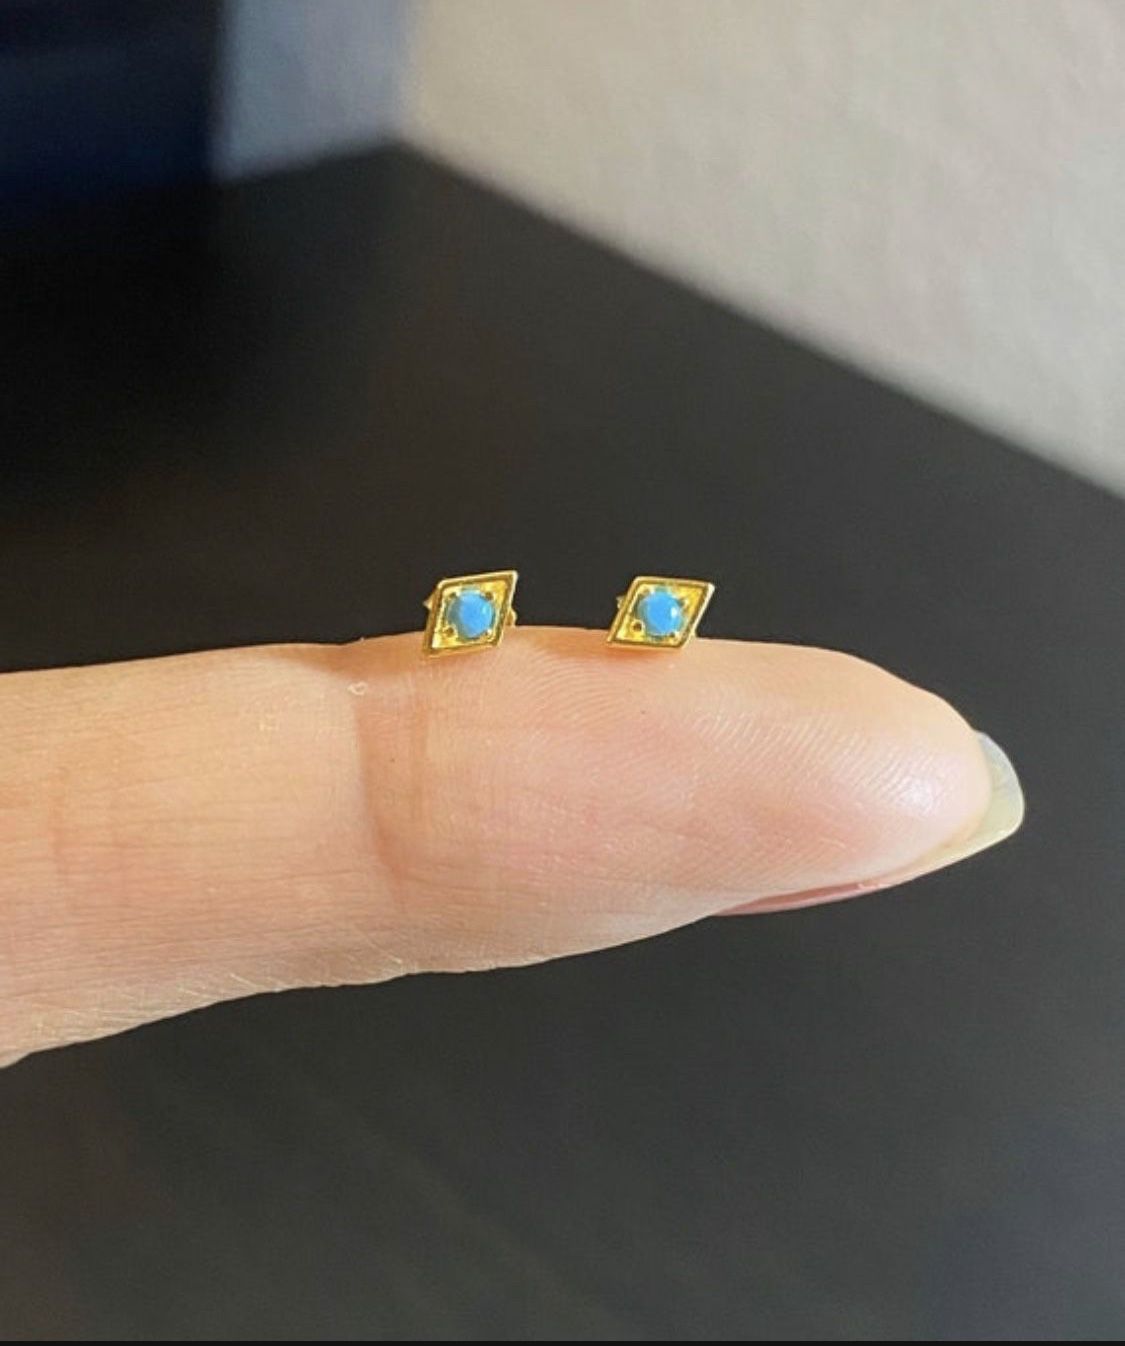 Gold Turquoise Stud Earrings,S925 Silver Turquoise Studs,Tiny Turquoise Studs,Minimalist Earrings,Diamond Shape Studs,Tiny Gold Studs, Gifts